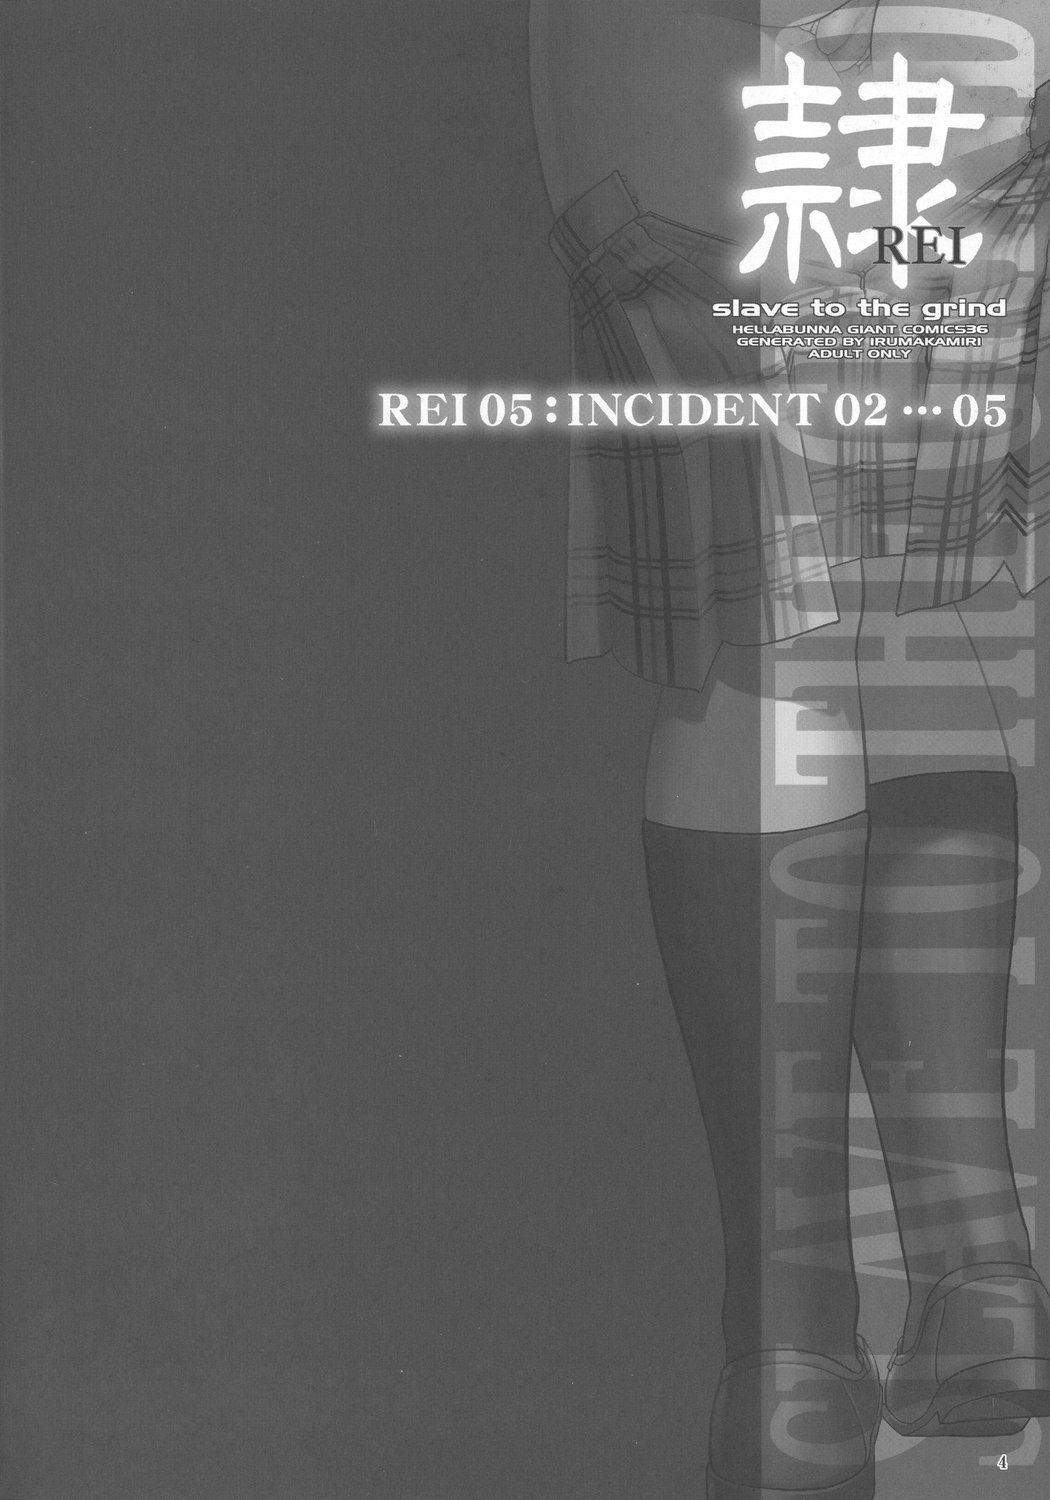 REI CHAPTER 05：INDECENT 02 2